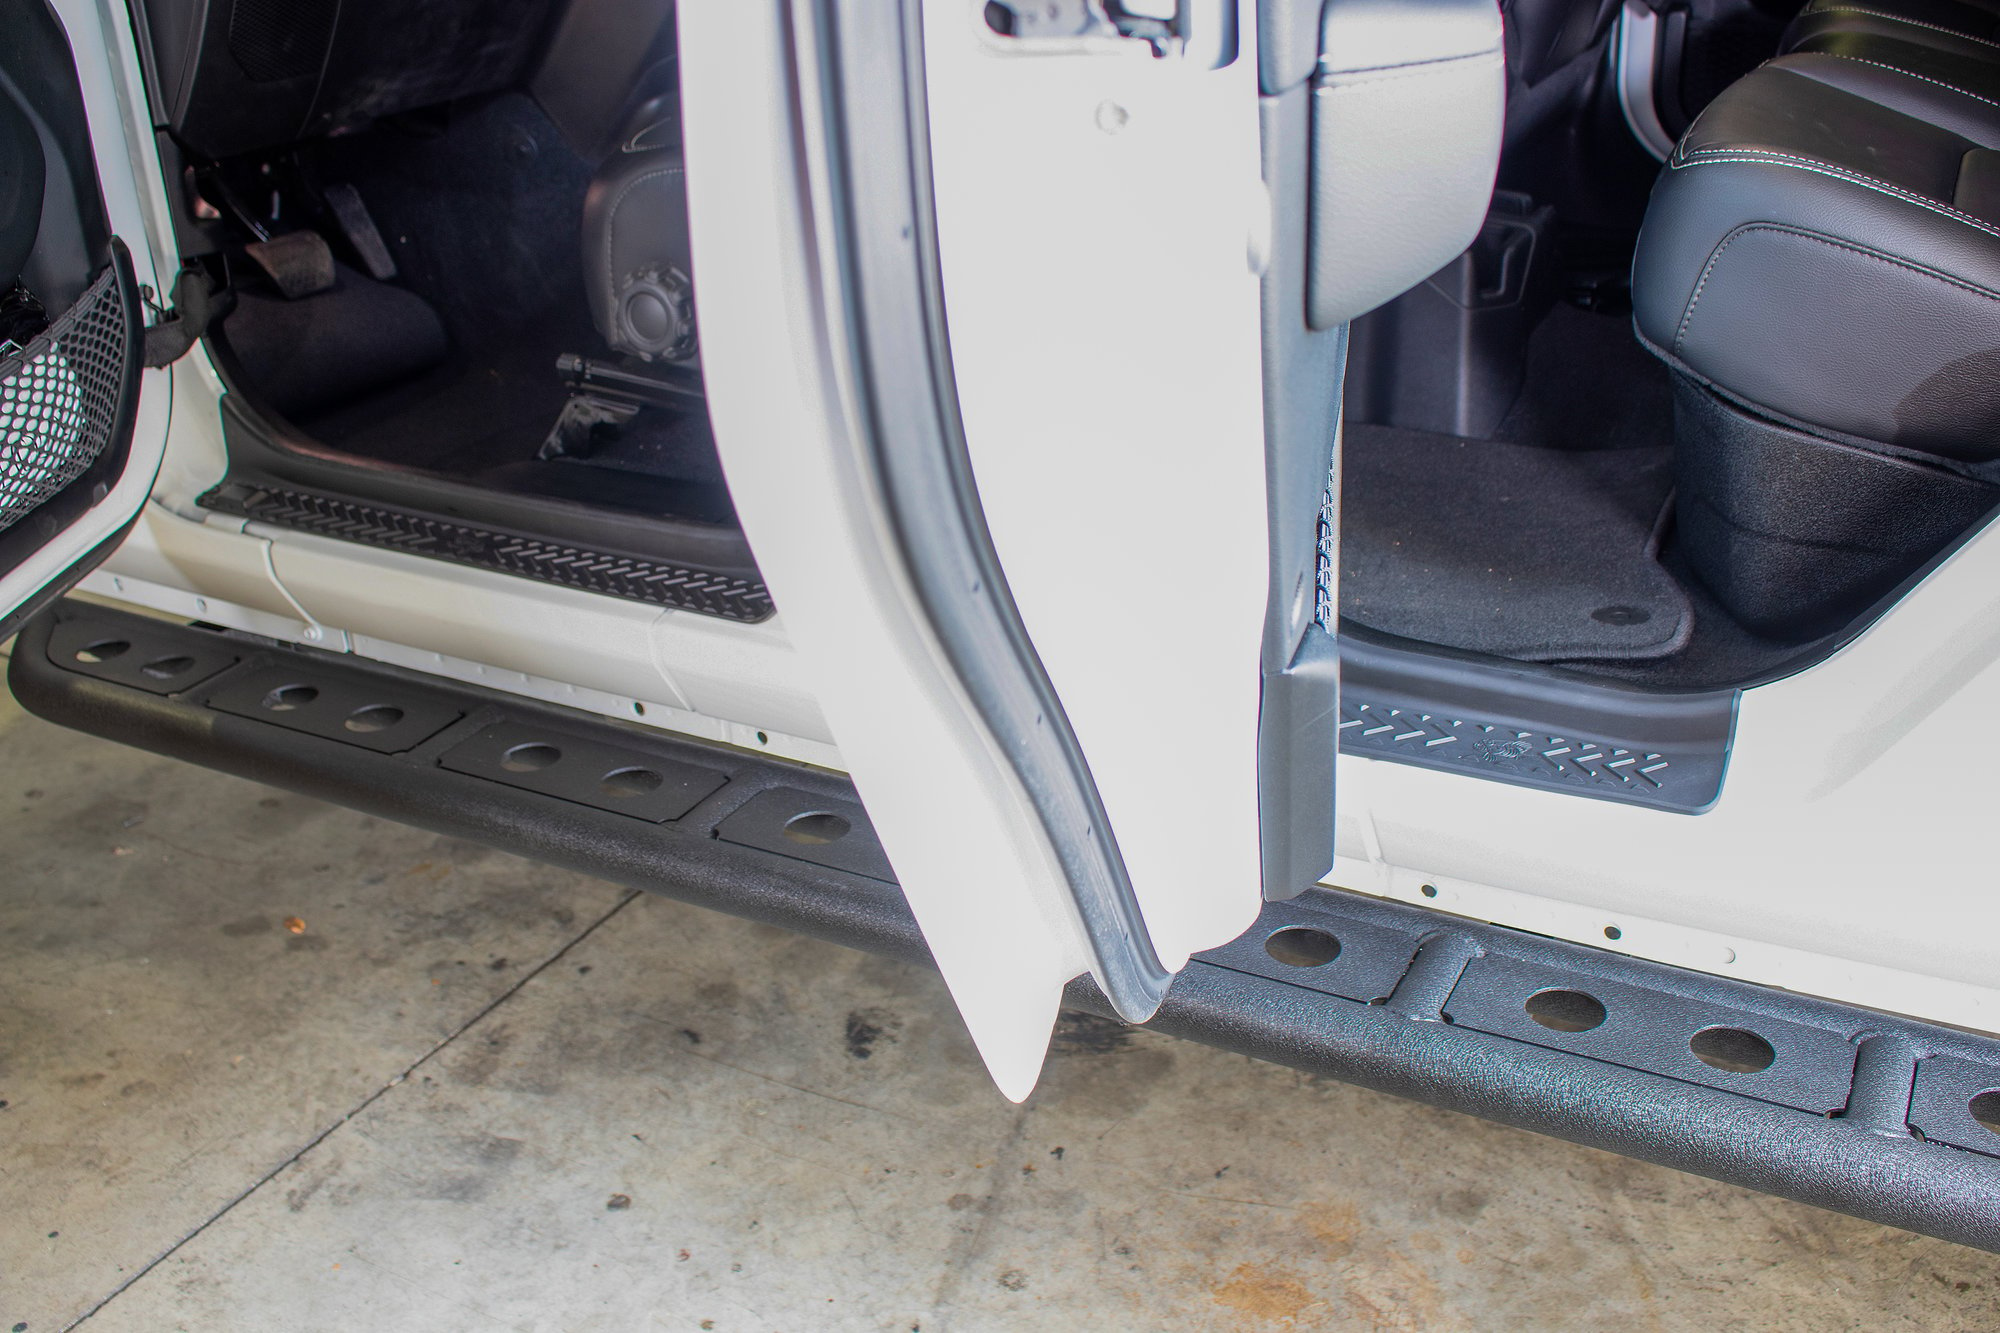 Door Sill Guards - Protect Your Car Door Sills From Your Daily Life